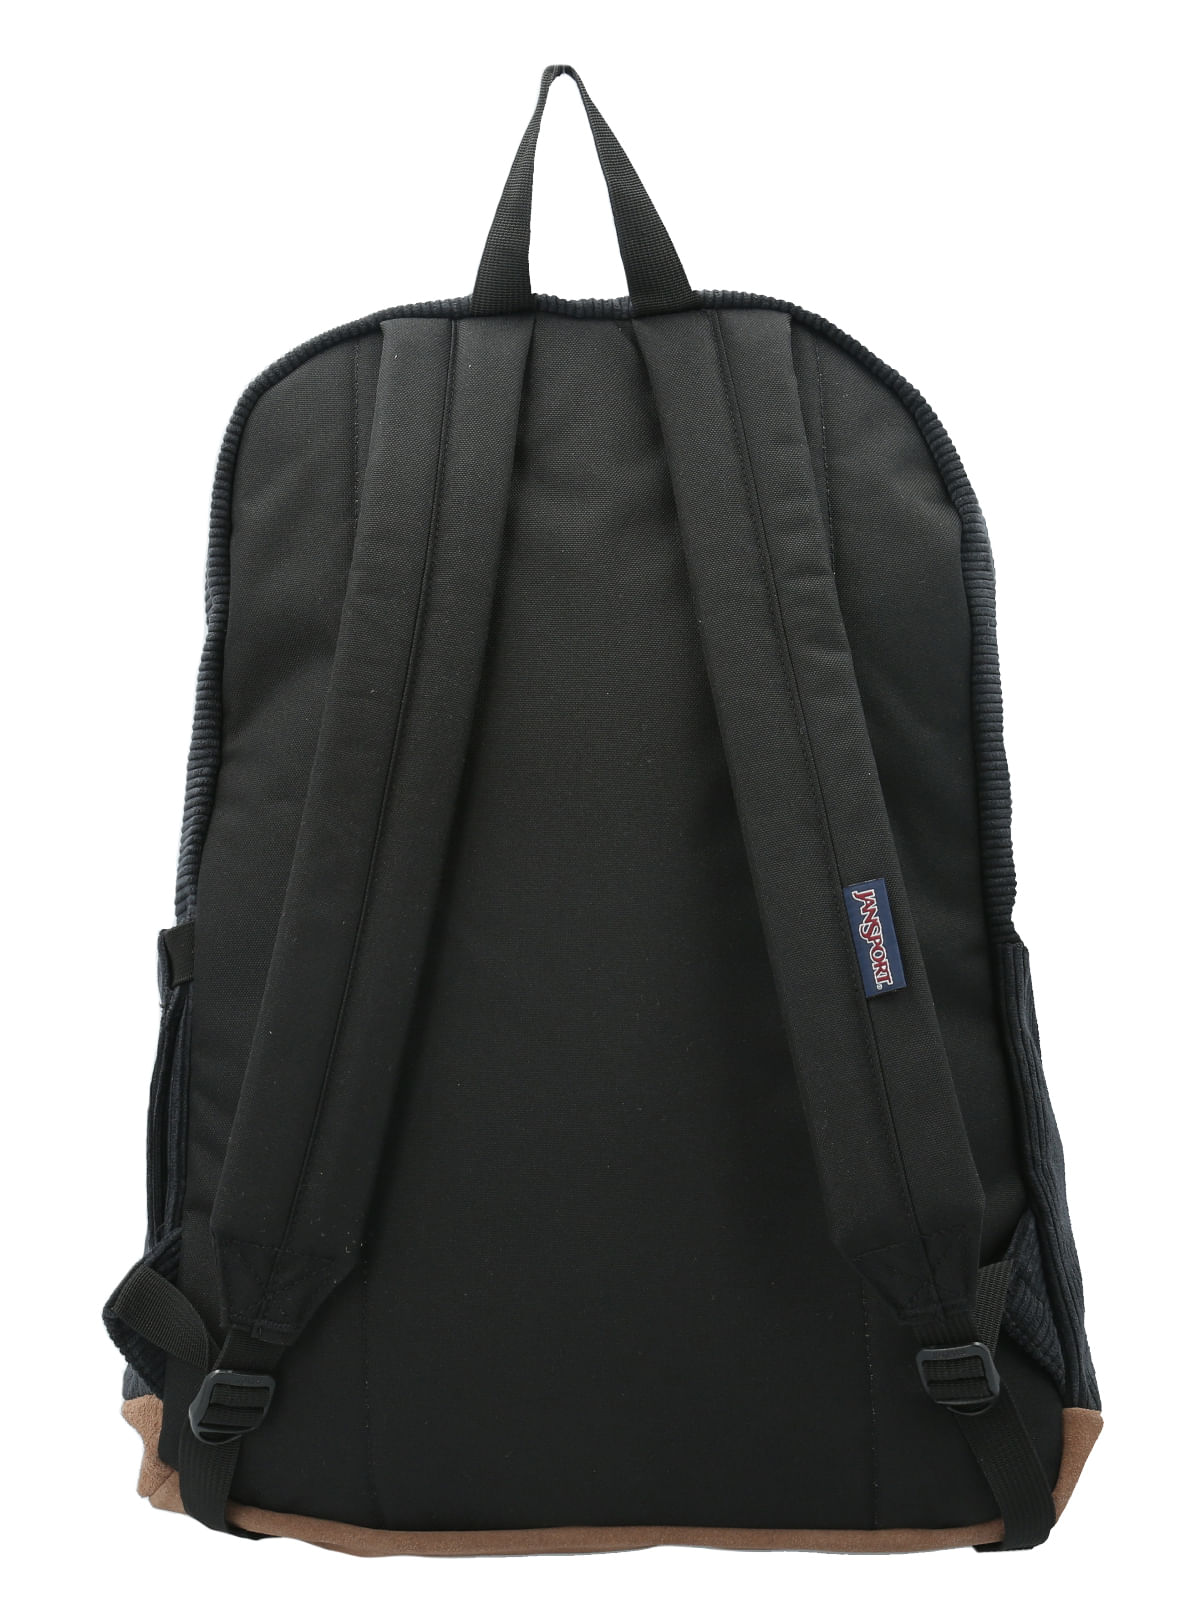 MOCHILA JANSPORT RIGHT PACK EXPRESSIONS NEGRO